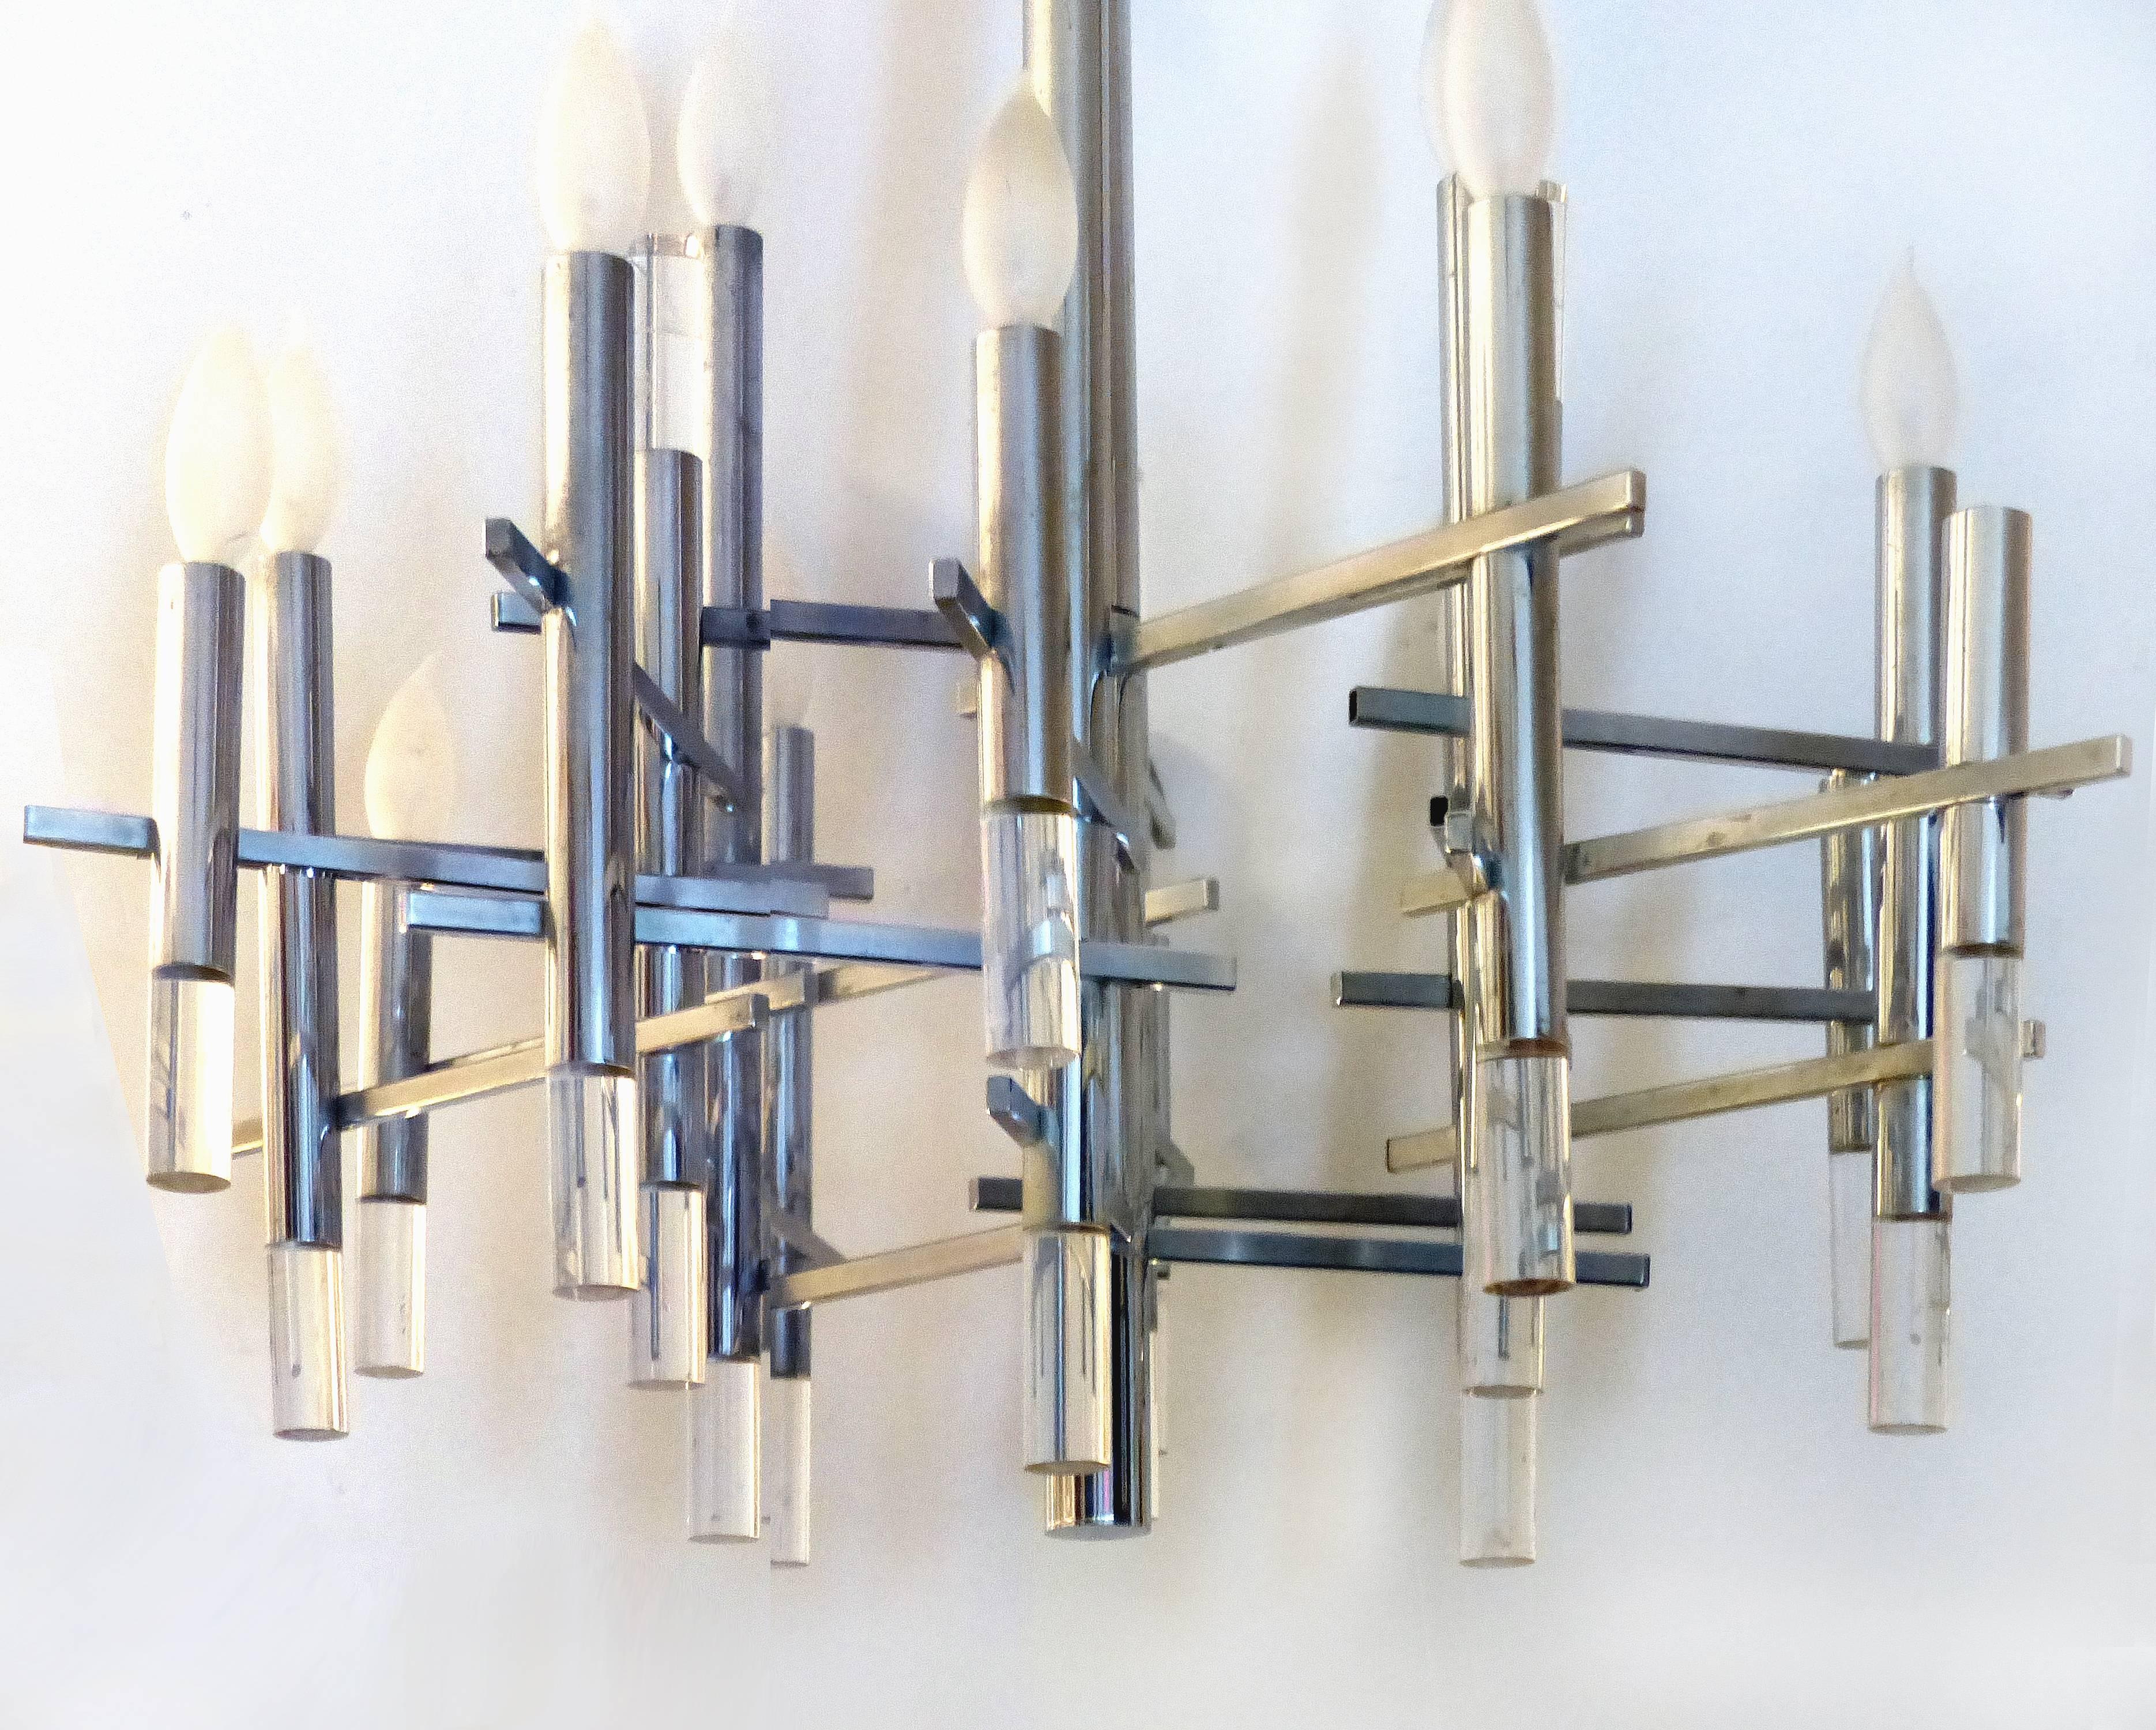 Gaetano Sciolari Italian Modernist Chrome Chandelier

Offered for sale is a 1970s modernist chandelier by the Italian lighting designer Gaetano Sciolari created in an angular geometric design. The vertical chrome tubes support sockets above and